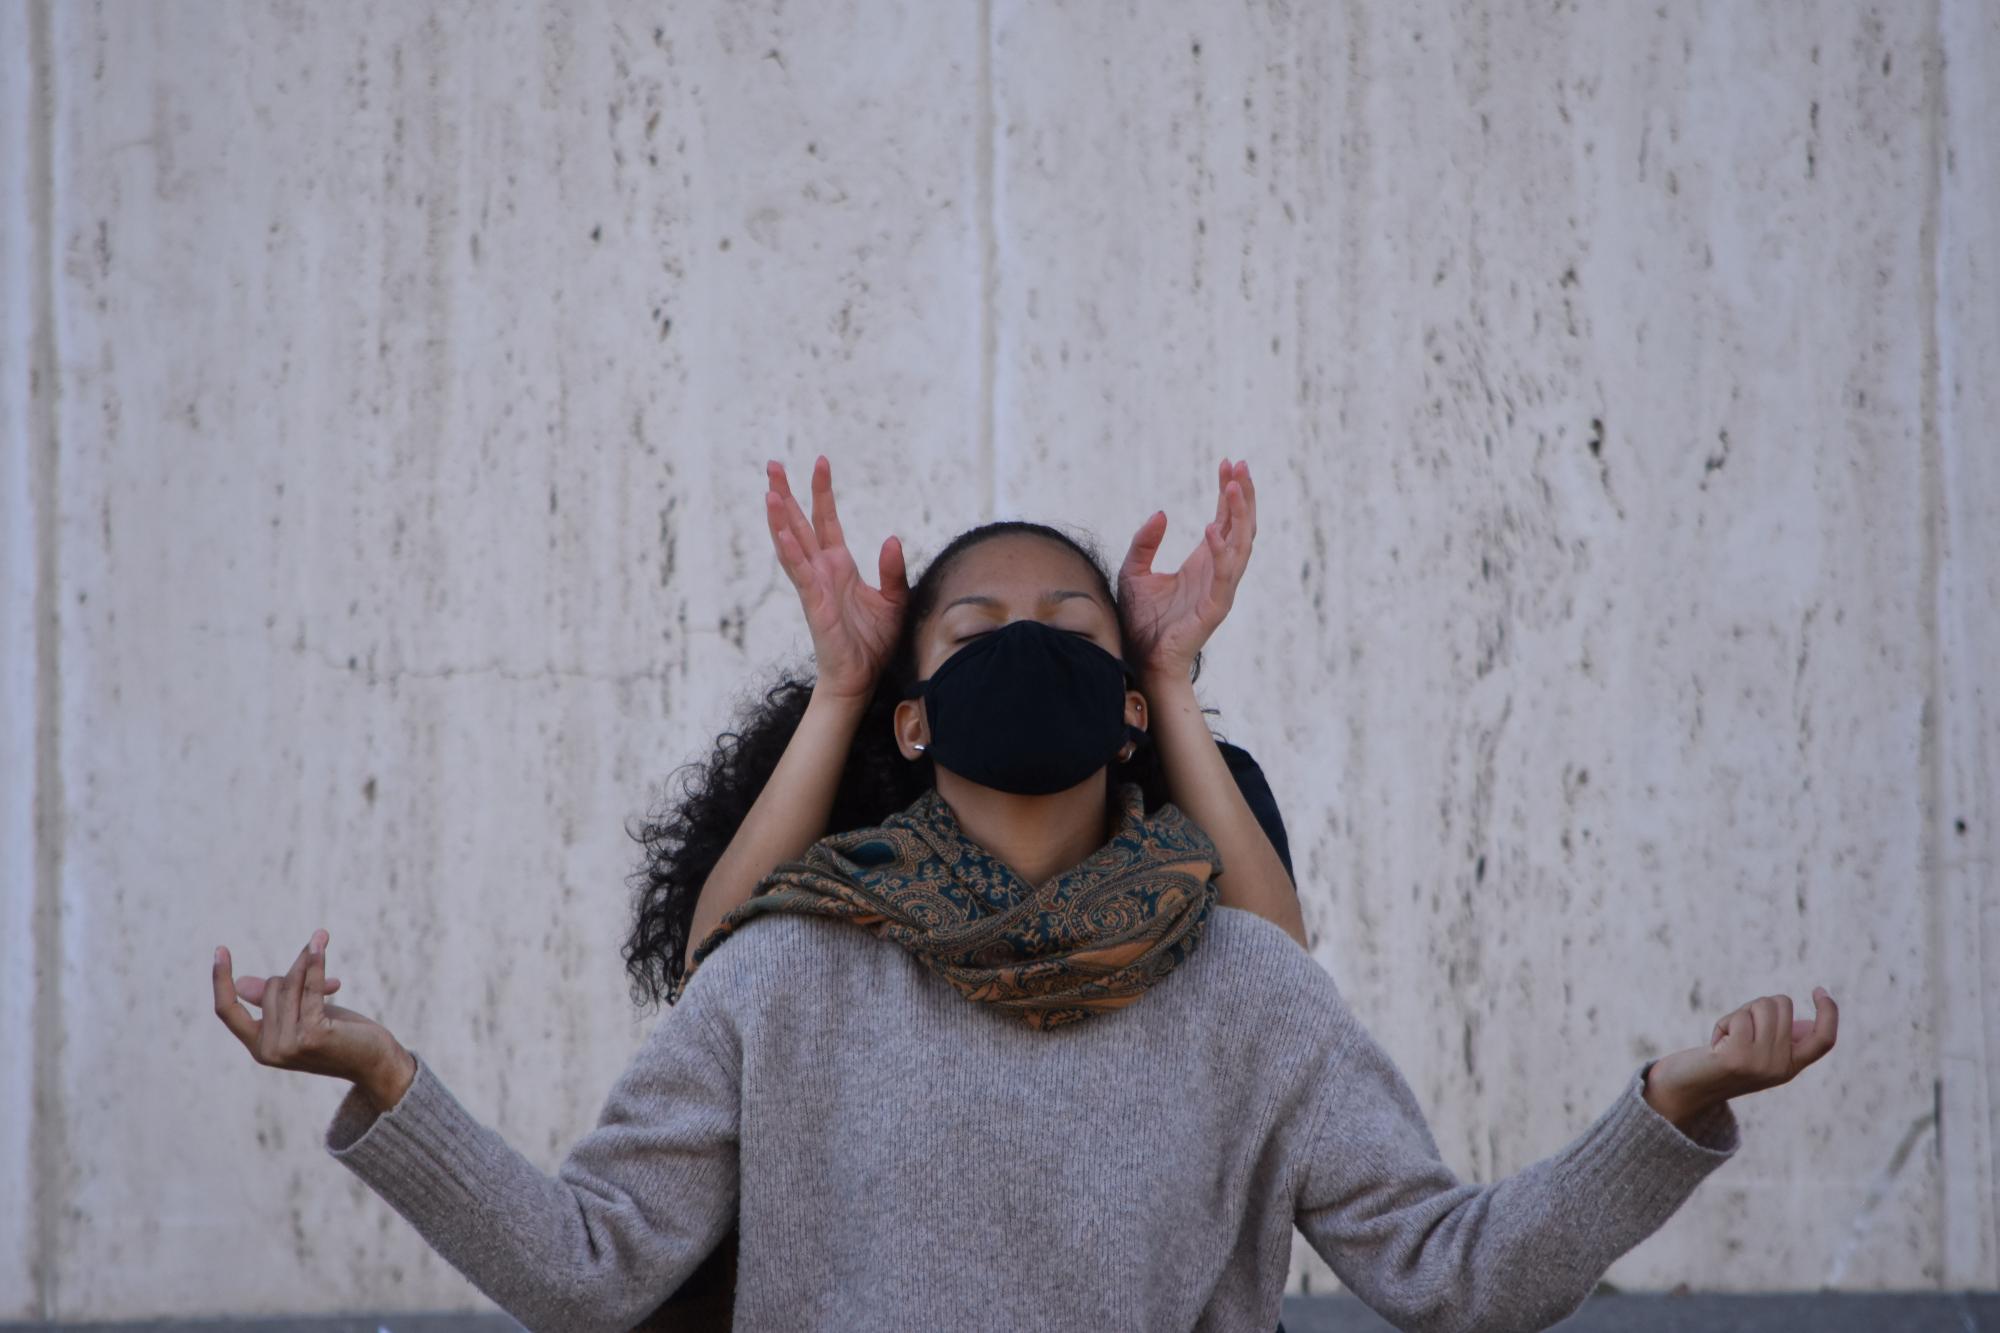 dancer in a drown sweater and black mask holds her arms out and looks up, while another dancer behind her places her hands beside her head